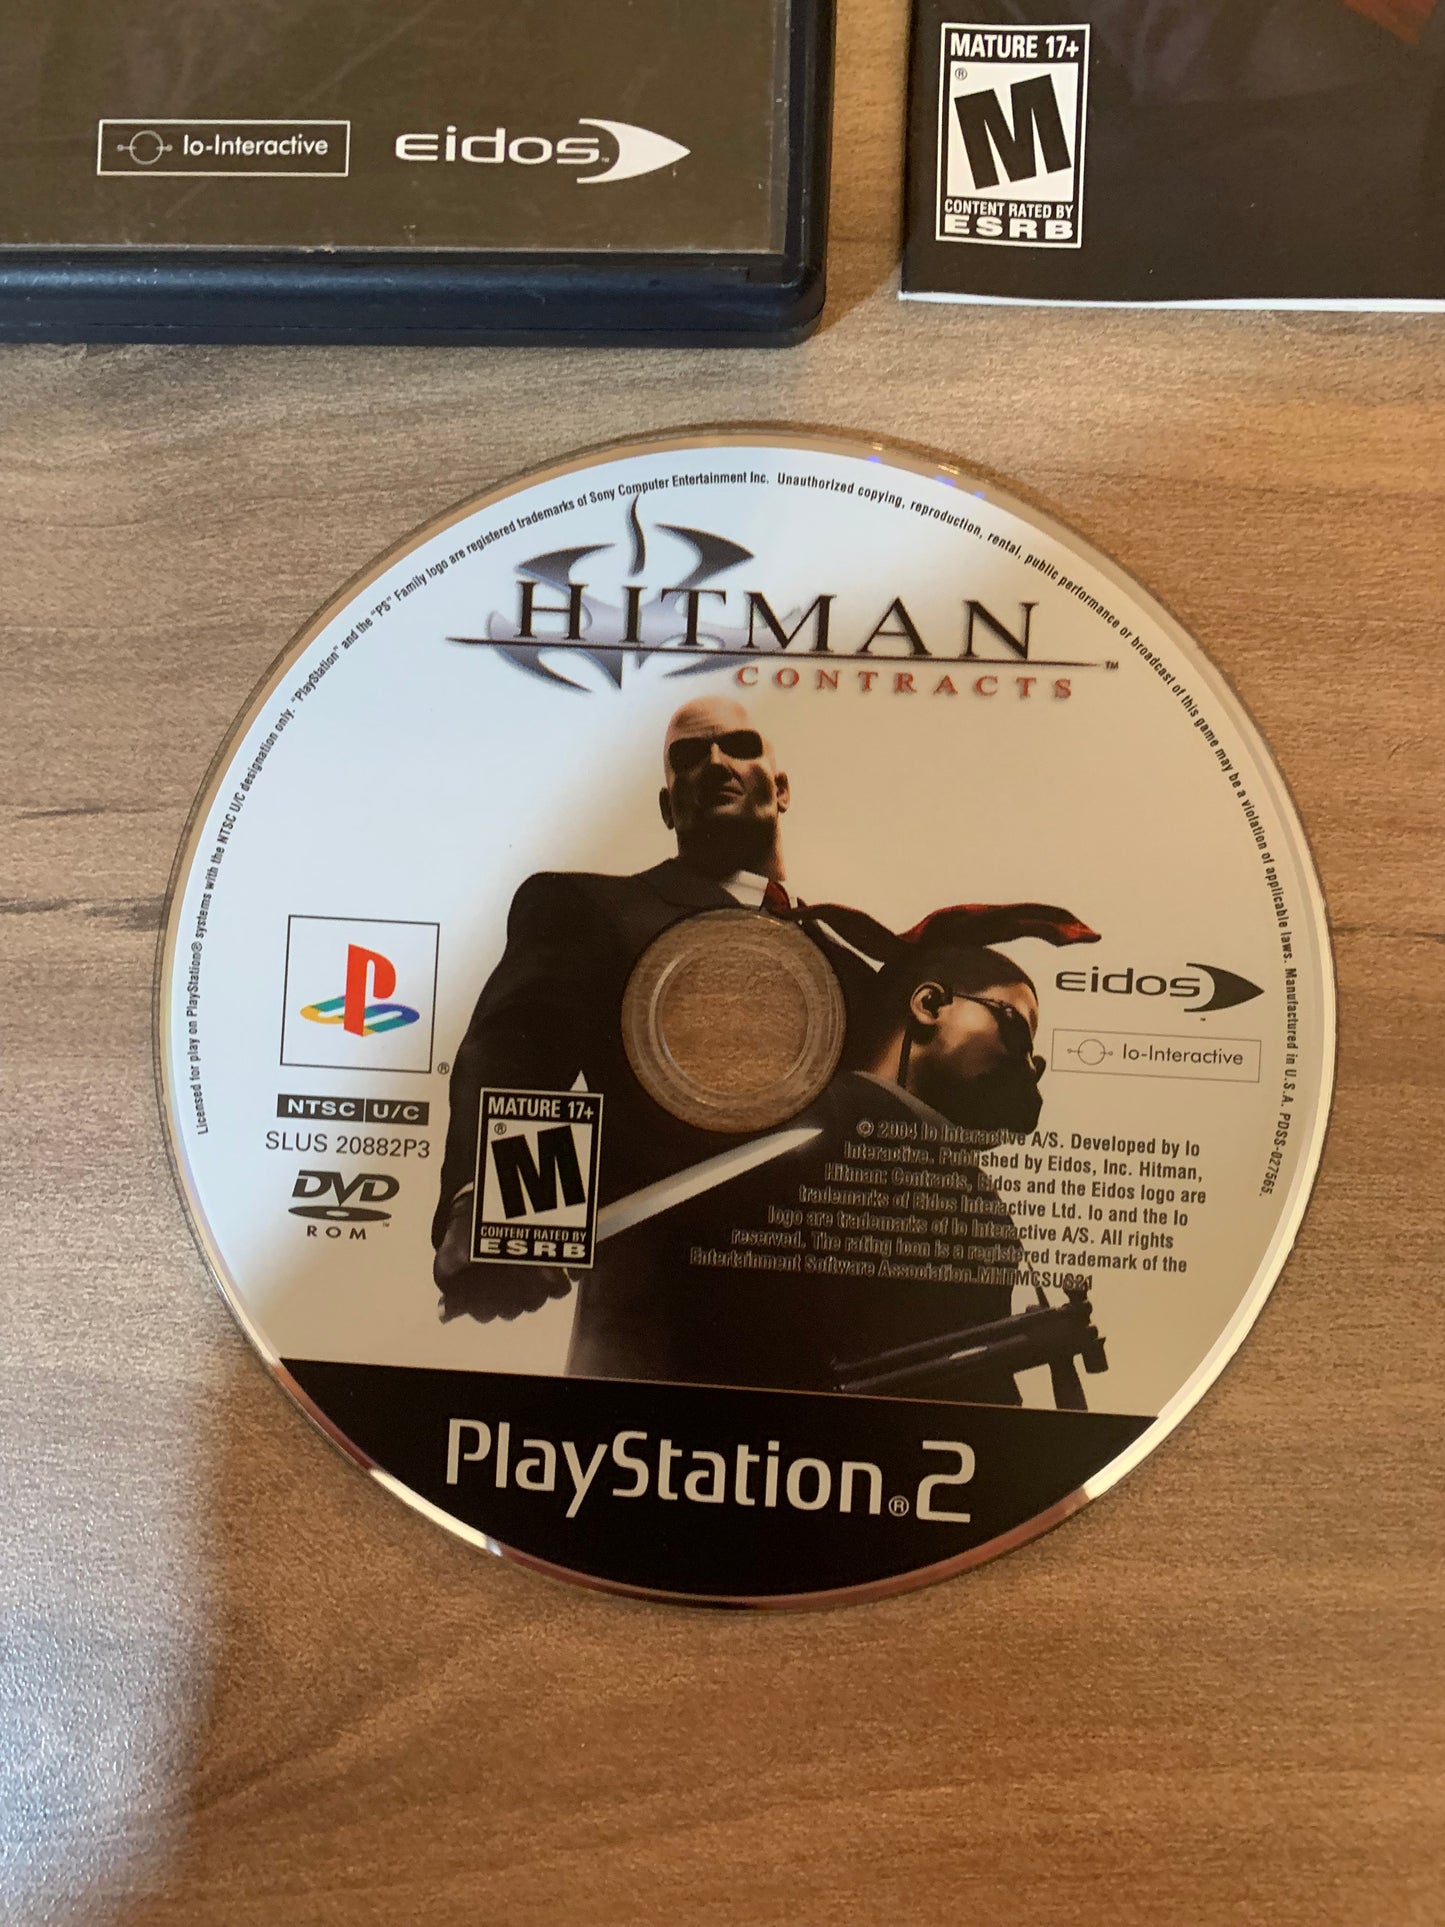 SONY PLAYSTATiON 2 [PS2] | HiTMAN CONTRACTS